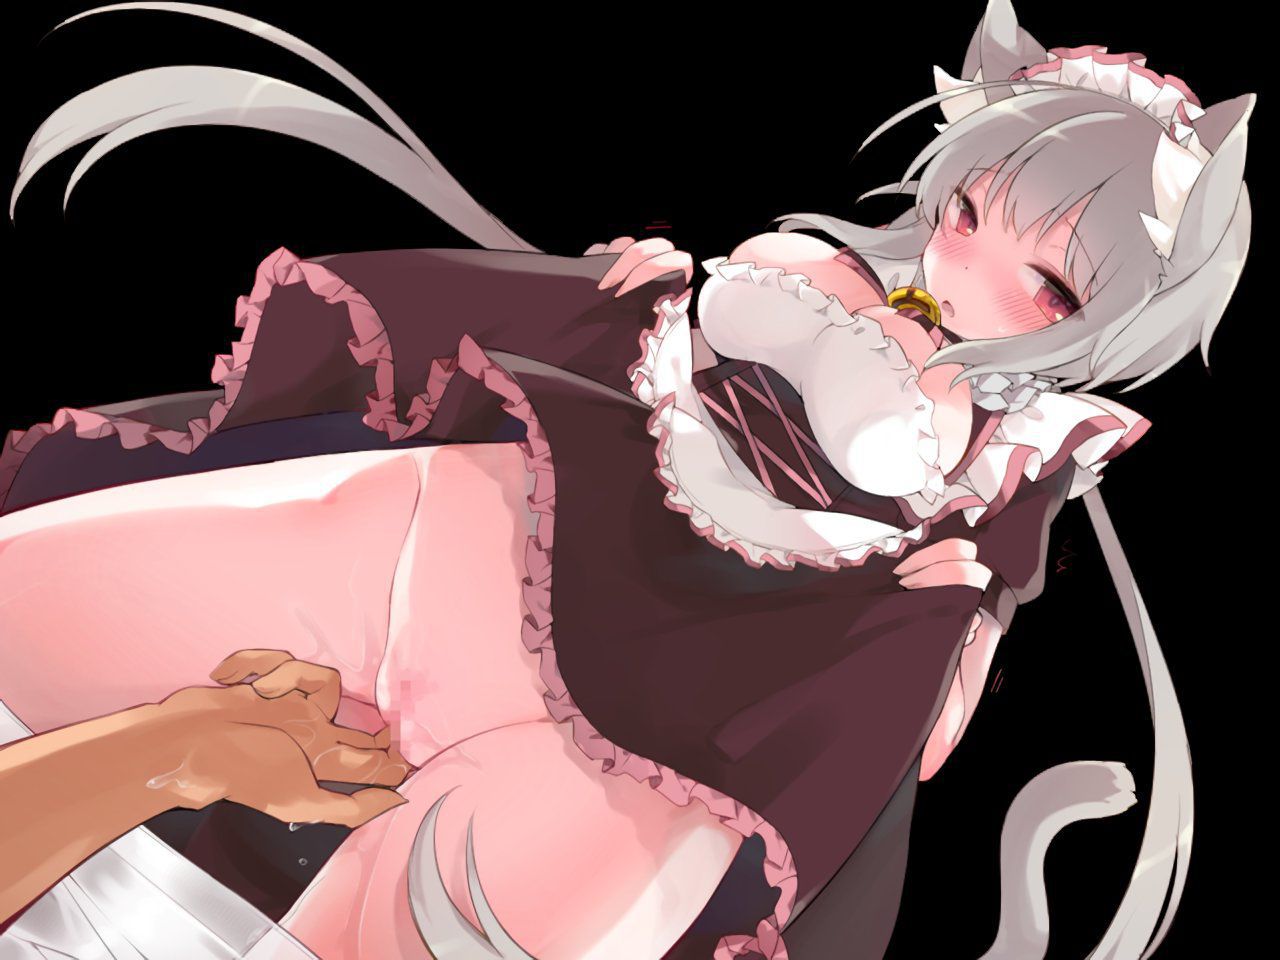 【Maid】Please send an image of a cute girl in maid clothes Part 22 16